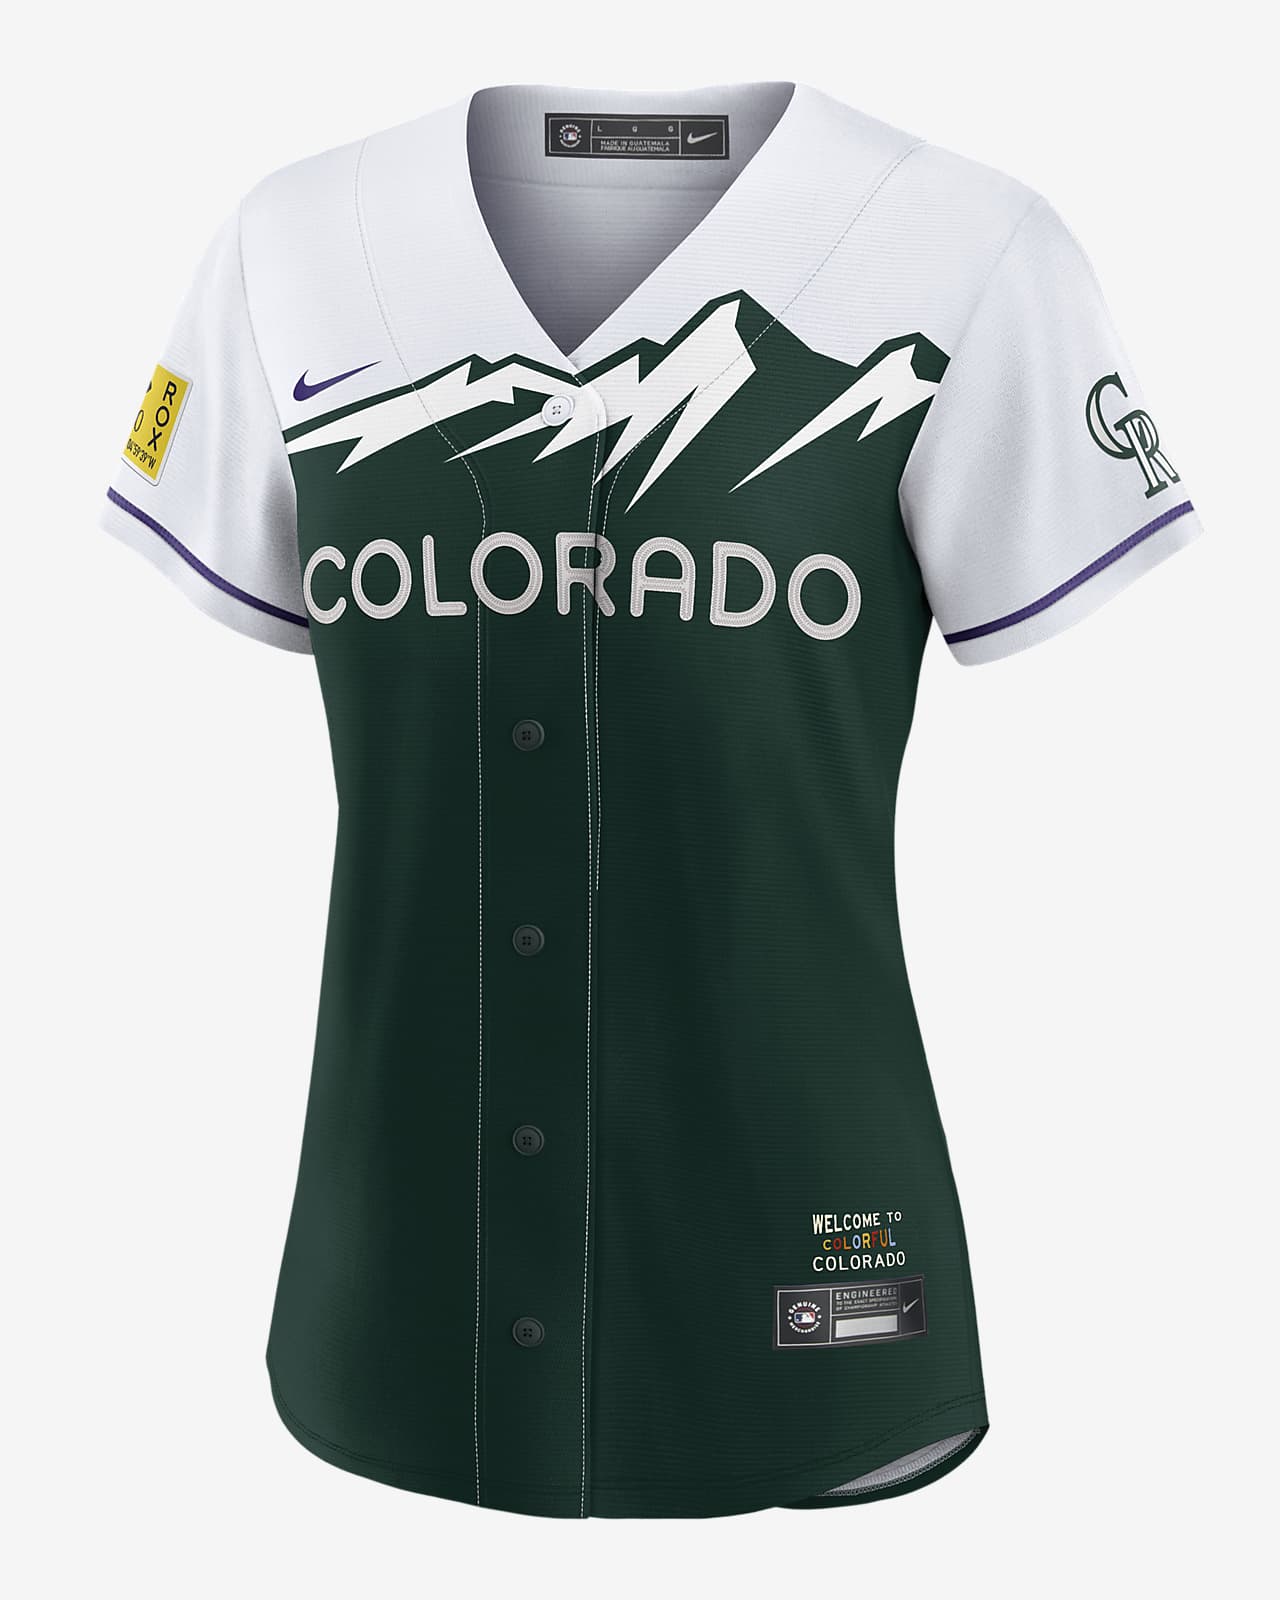 MLB® The Show™ - Go the extra mile in the Colorado Rockies Nike City Connect  Program